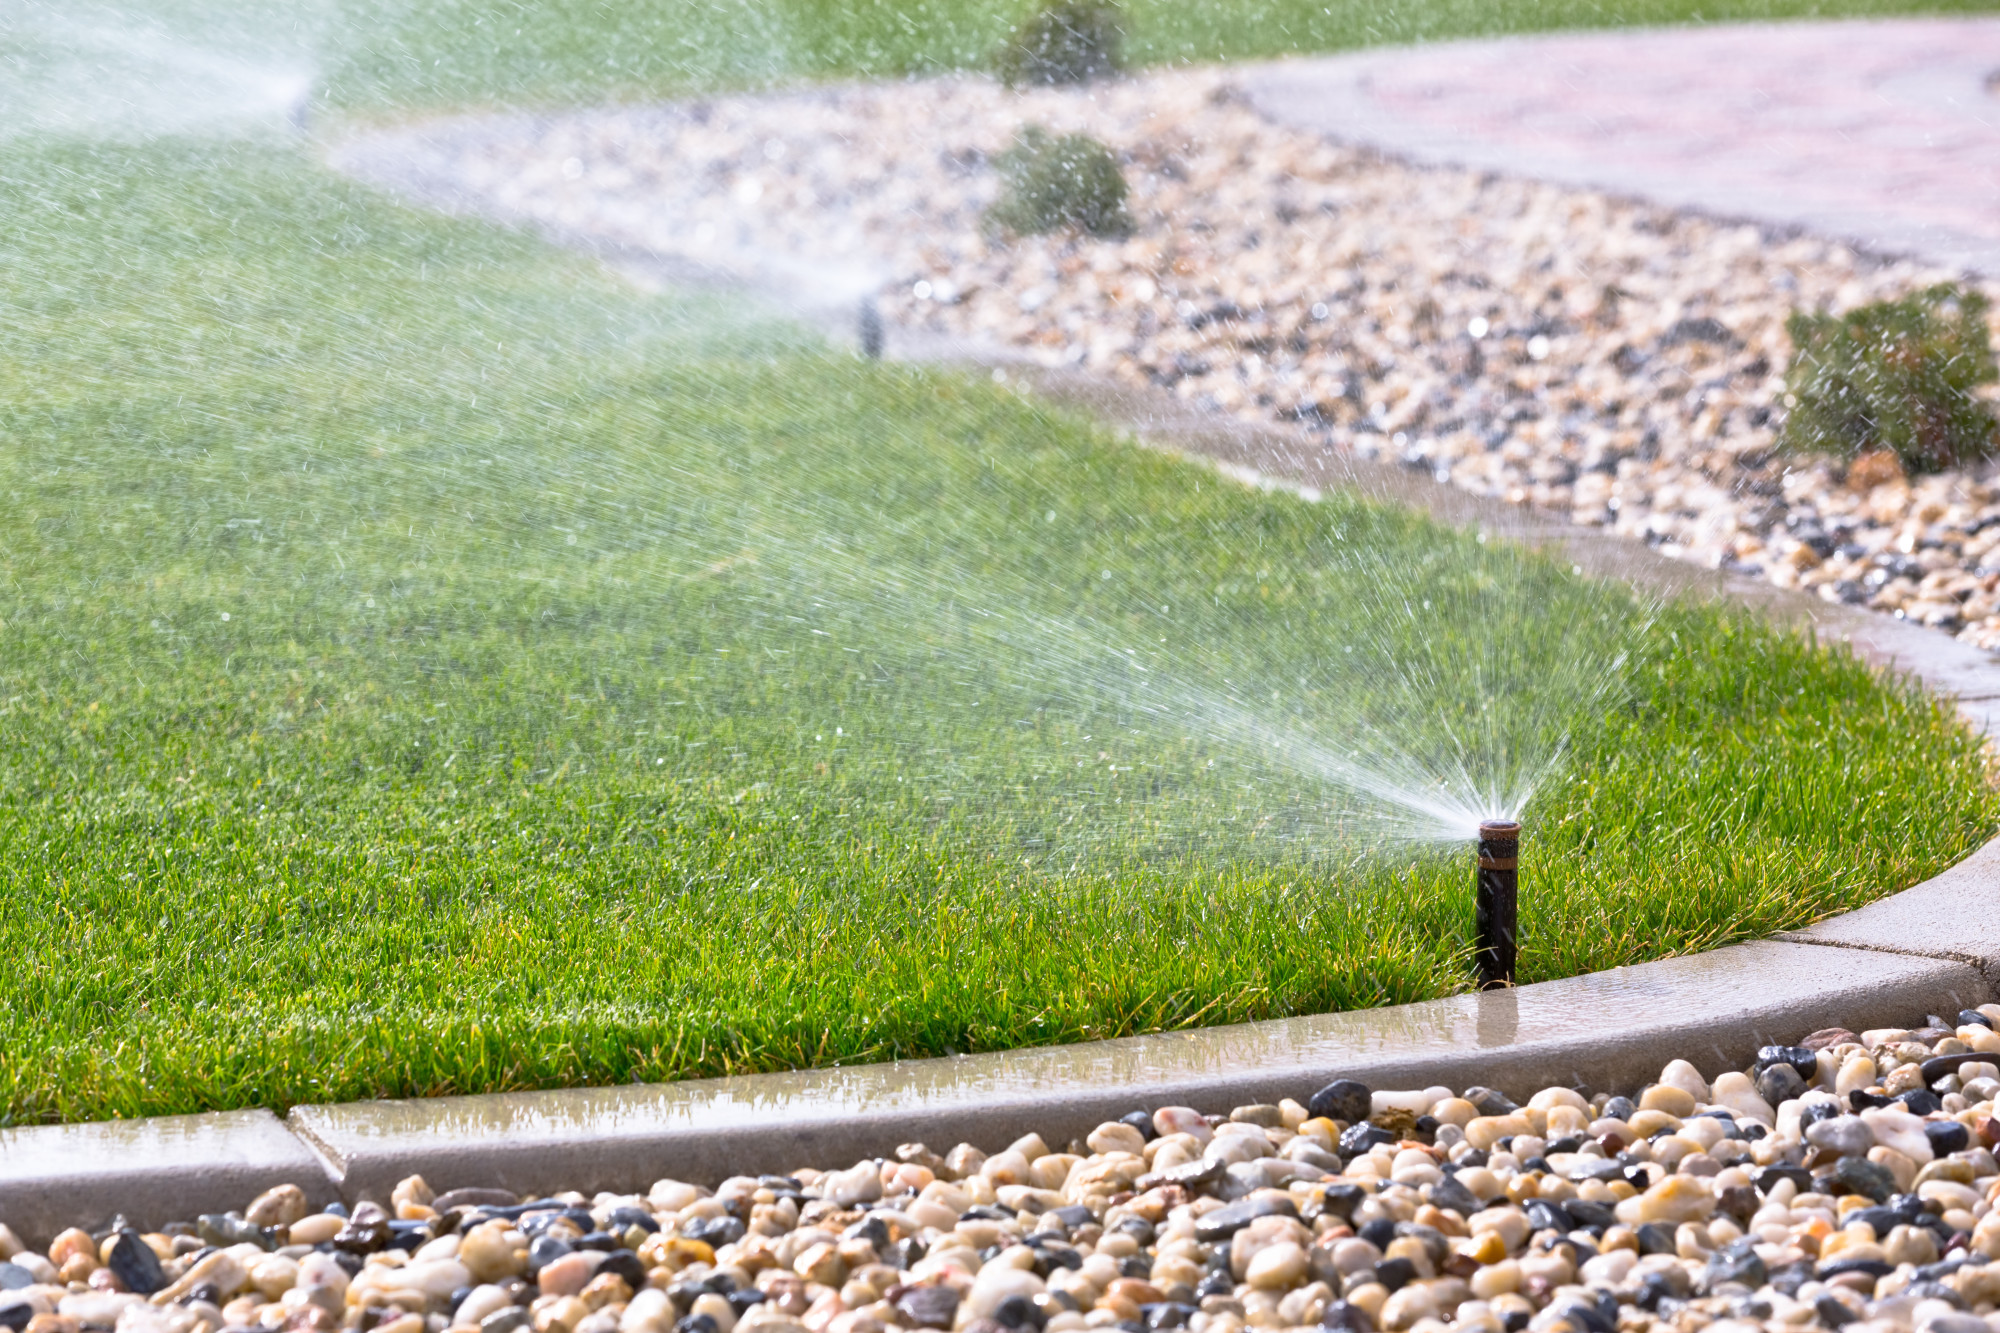 Know Your Zone: How a Sprinkler System Is Crucial for a Lush Lawn